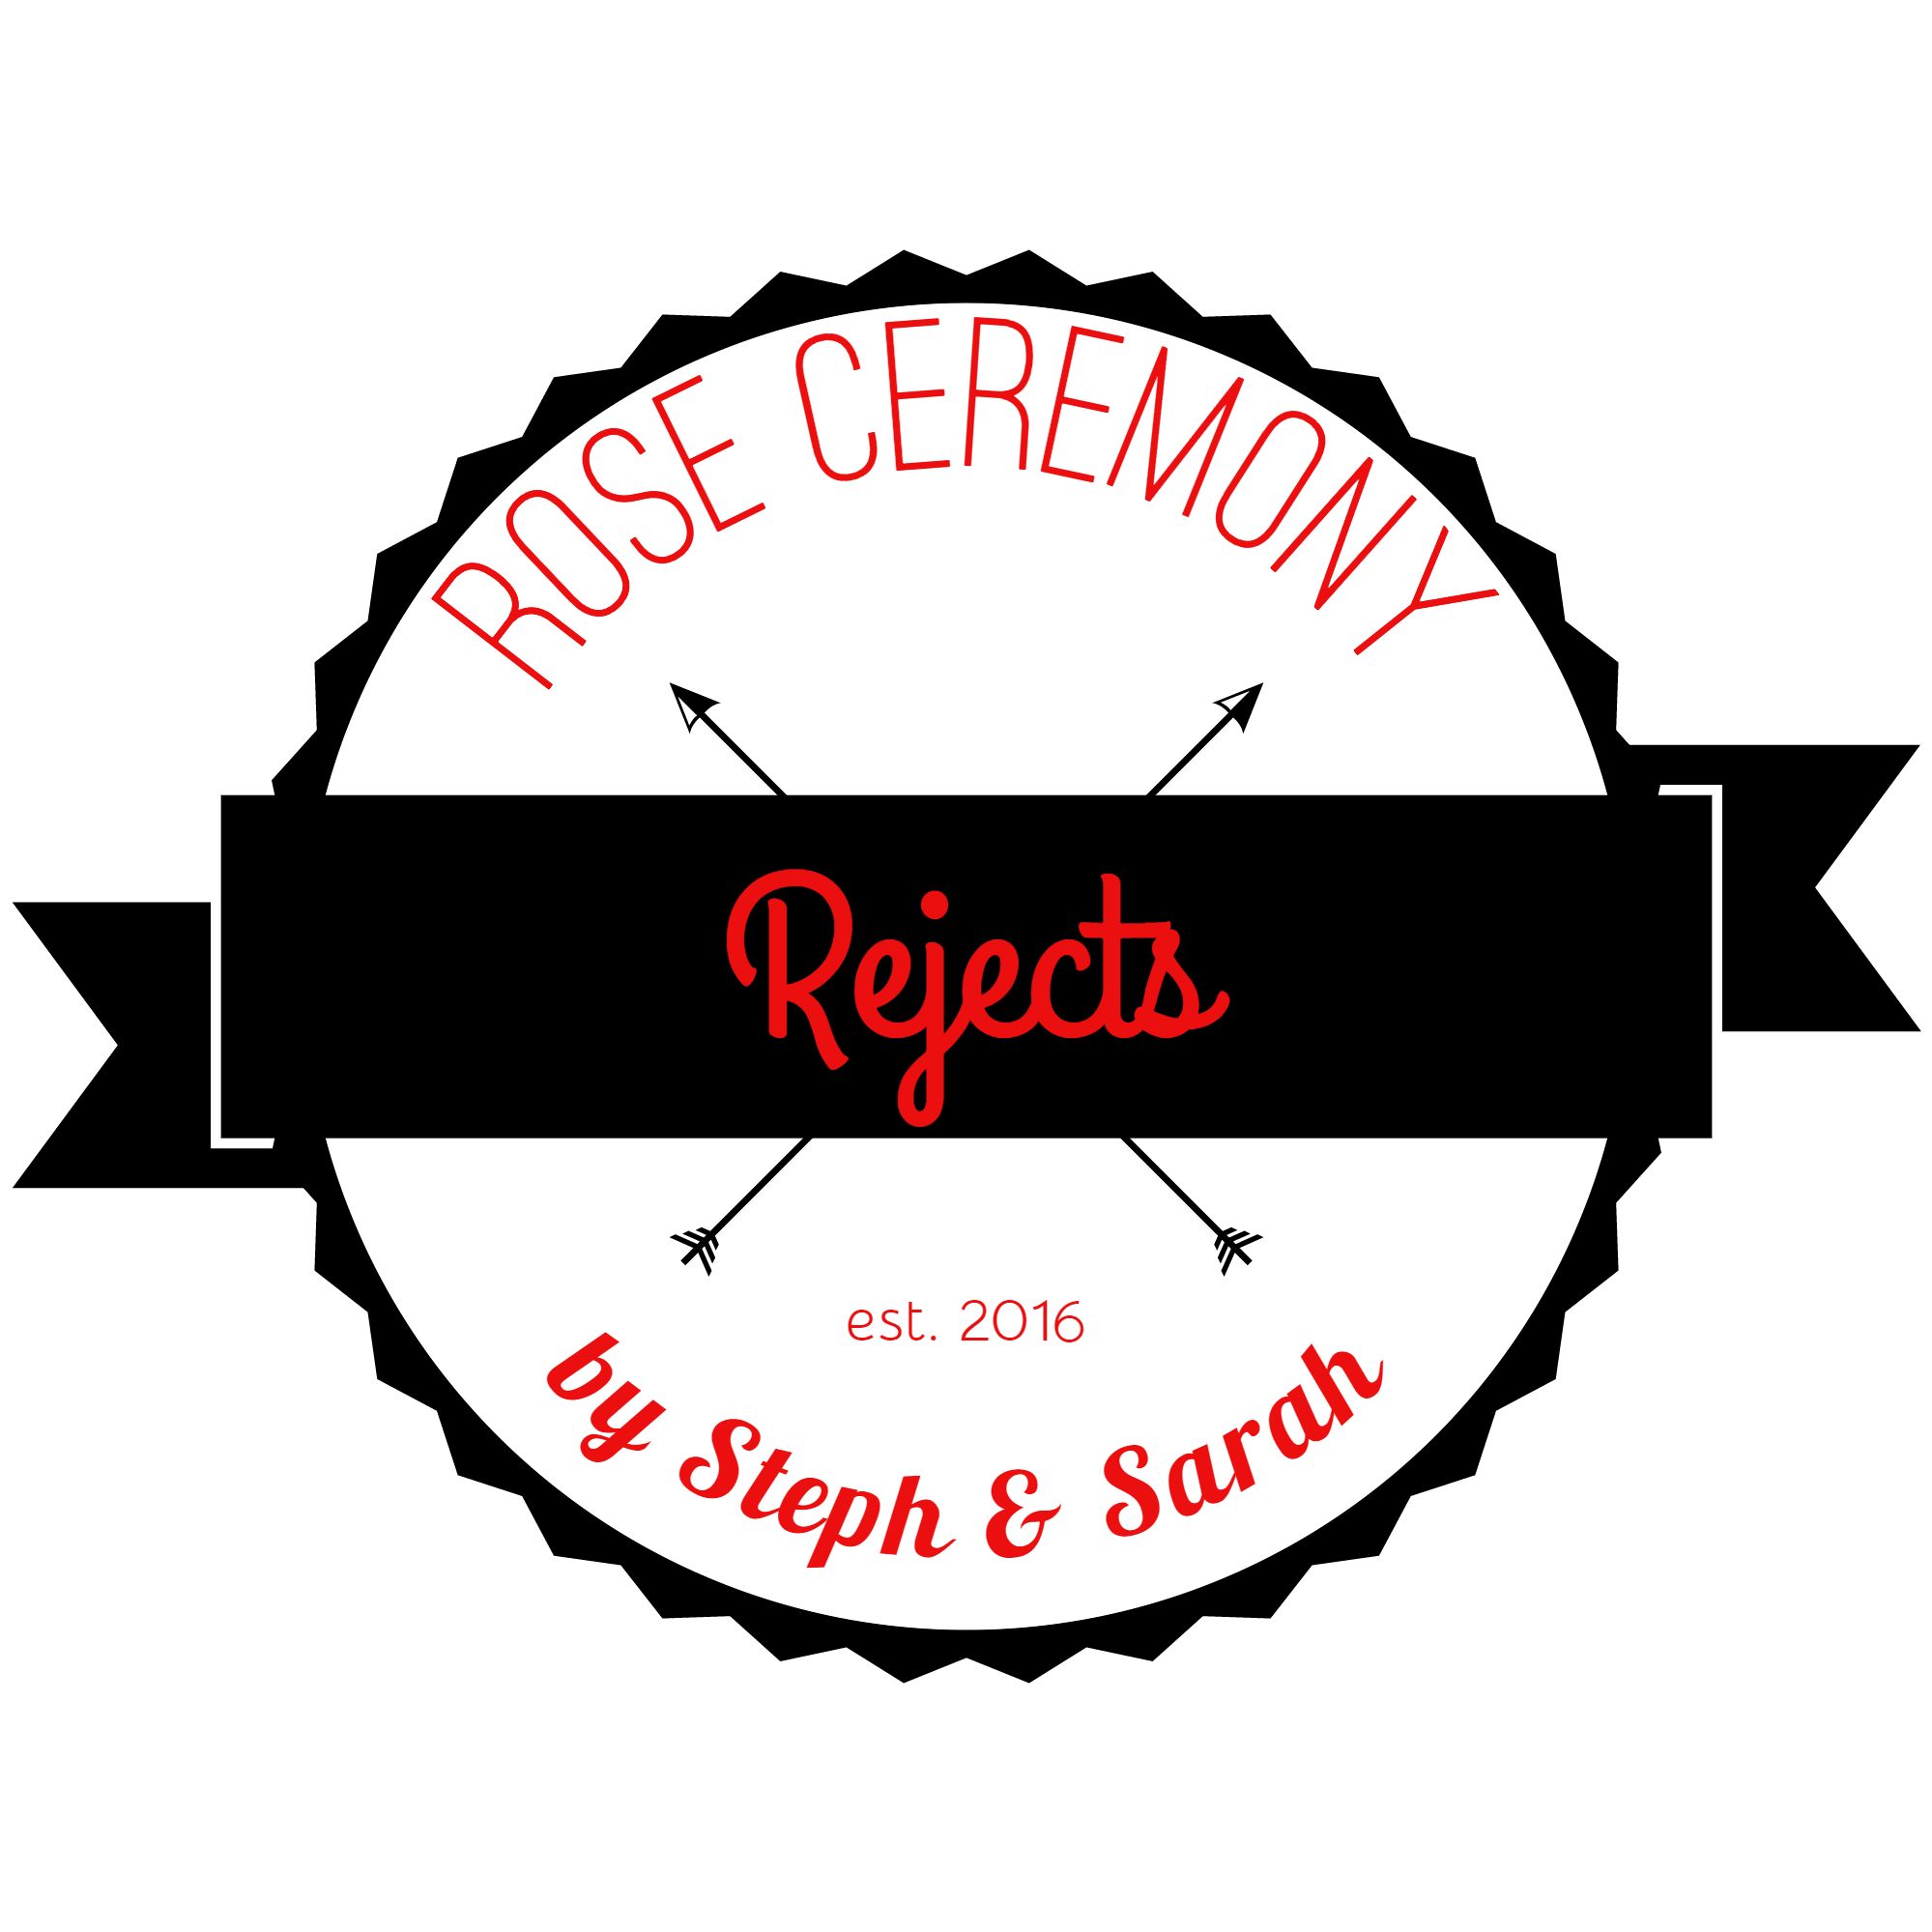 Rose Ceremony Rejects